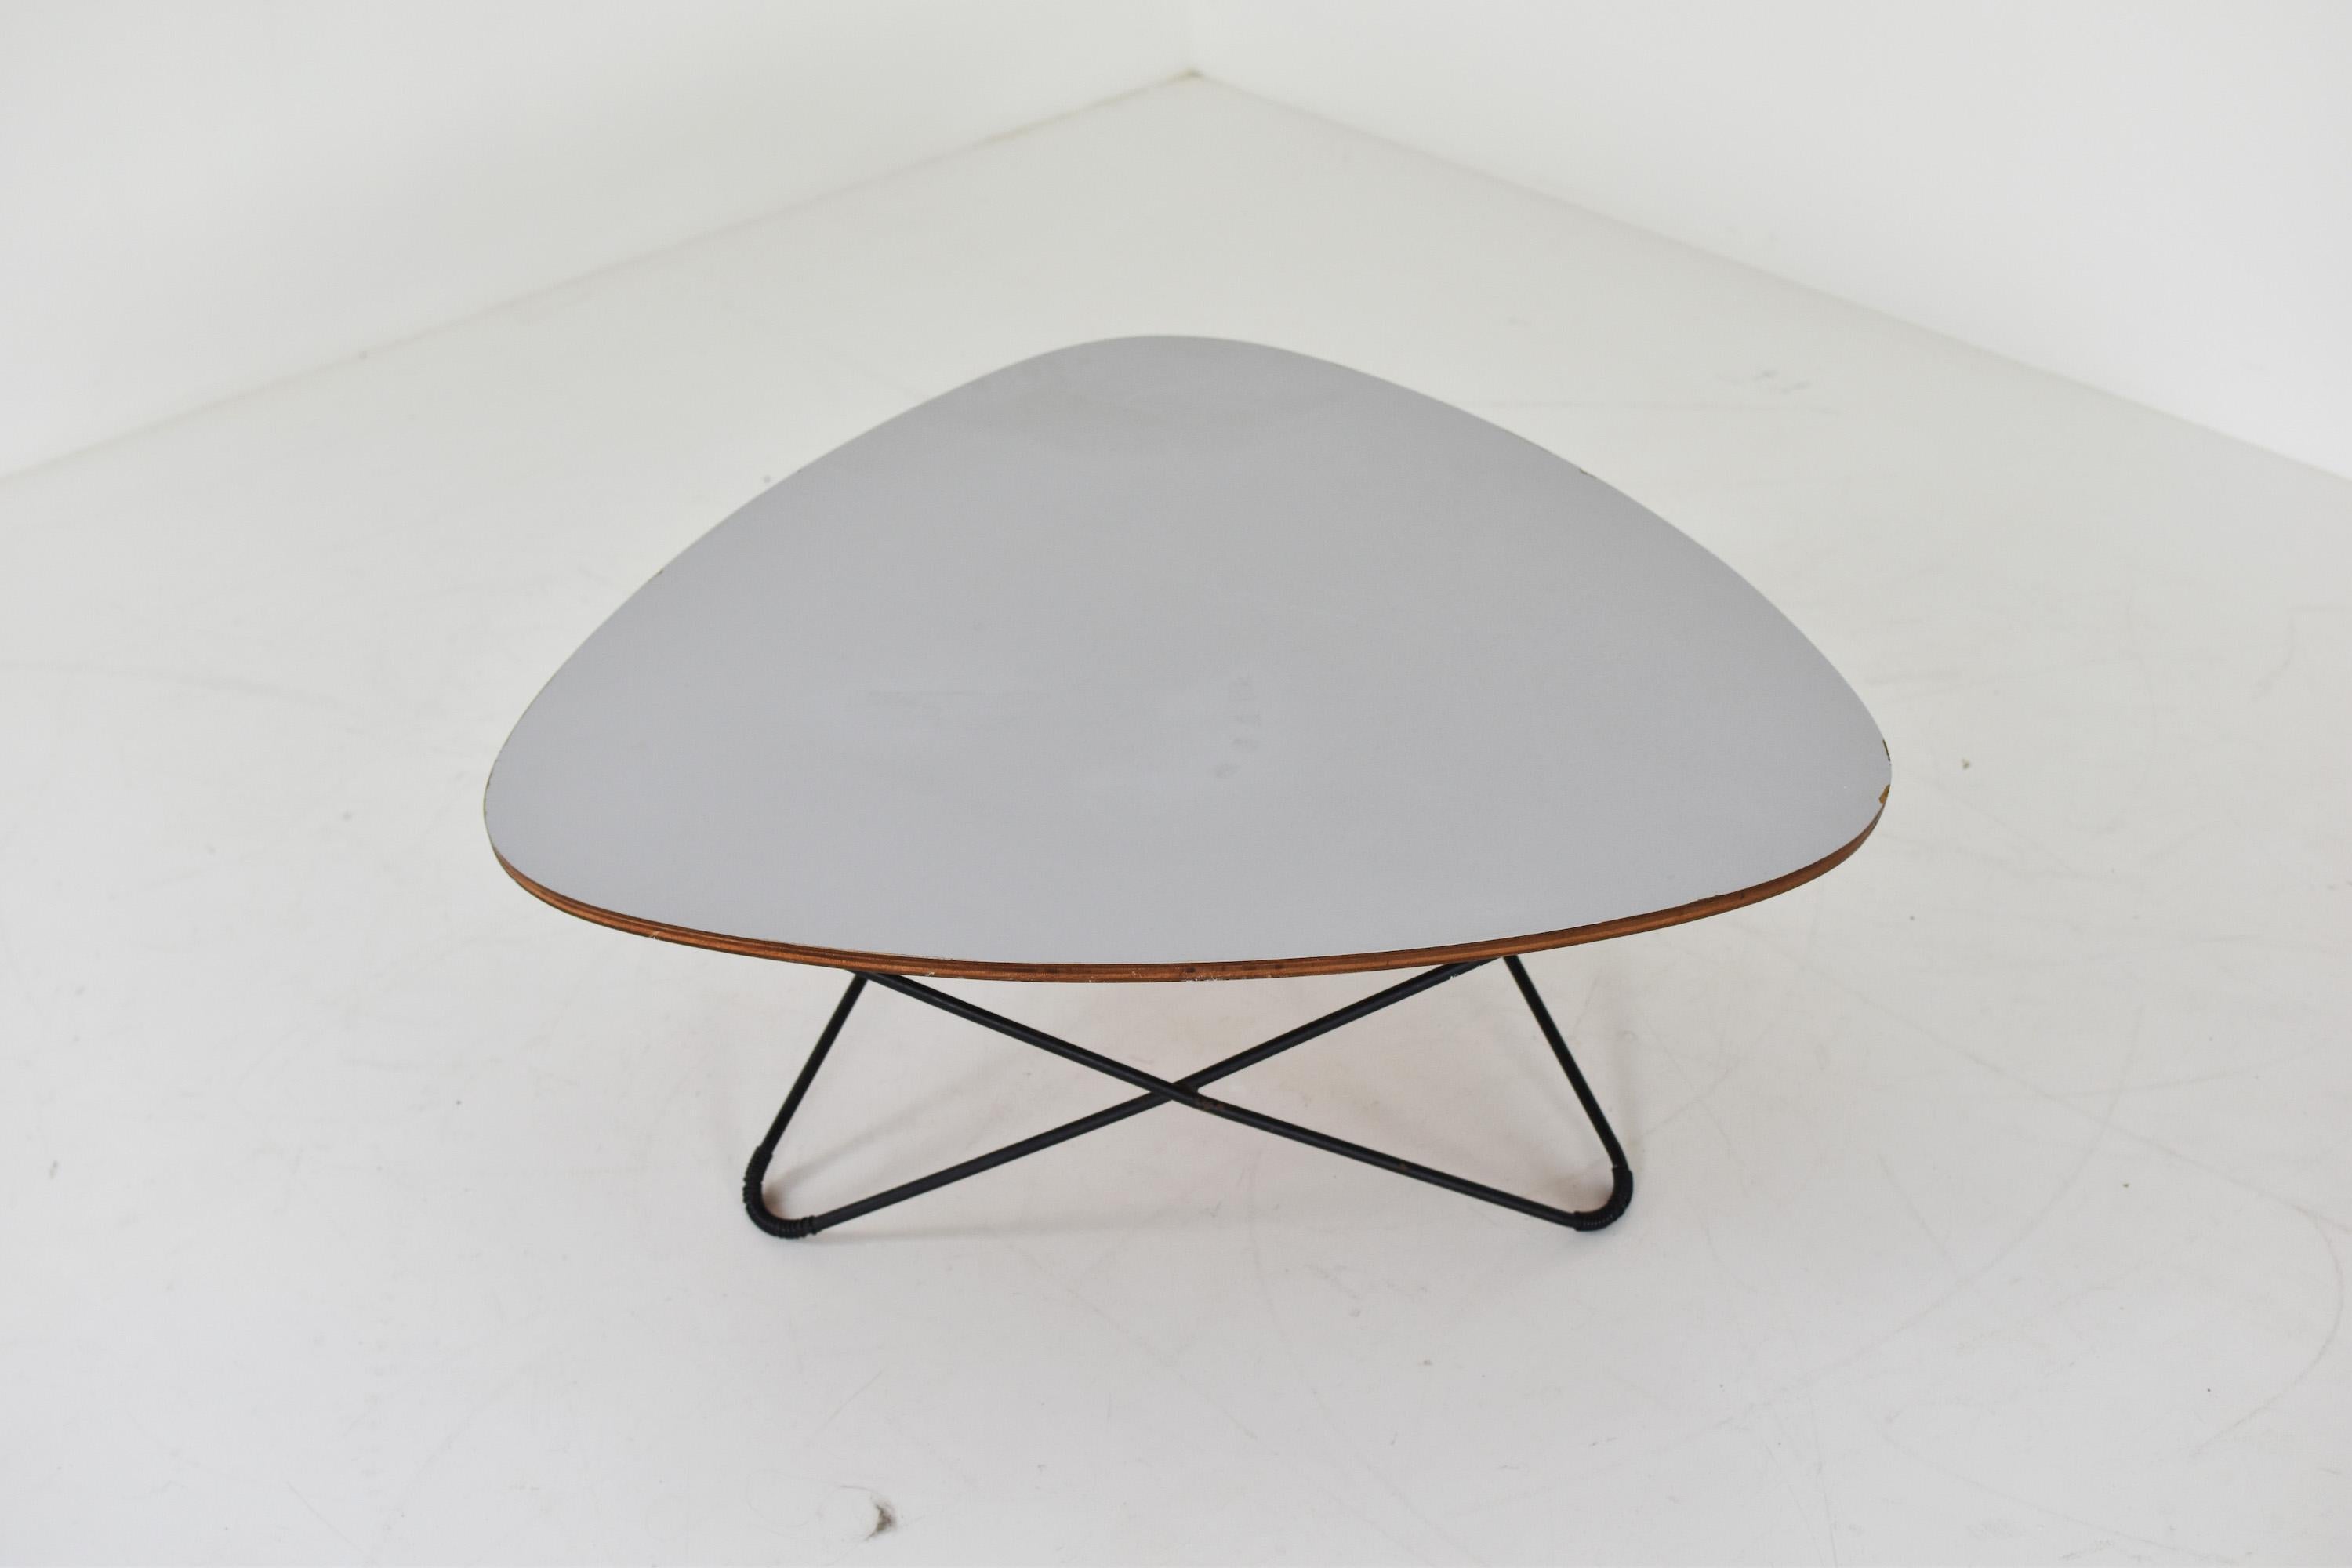 Mid-Century Modern Diamond Shaped Coffee Table by Florent Lasbleiz for Airborne, France 1954